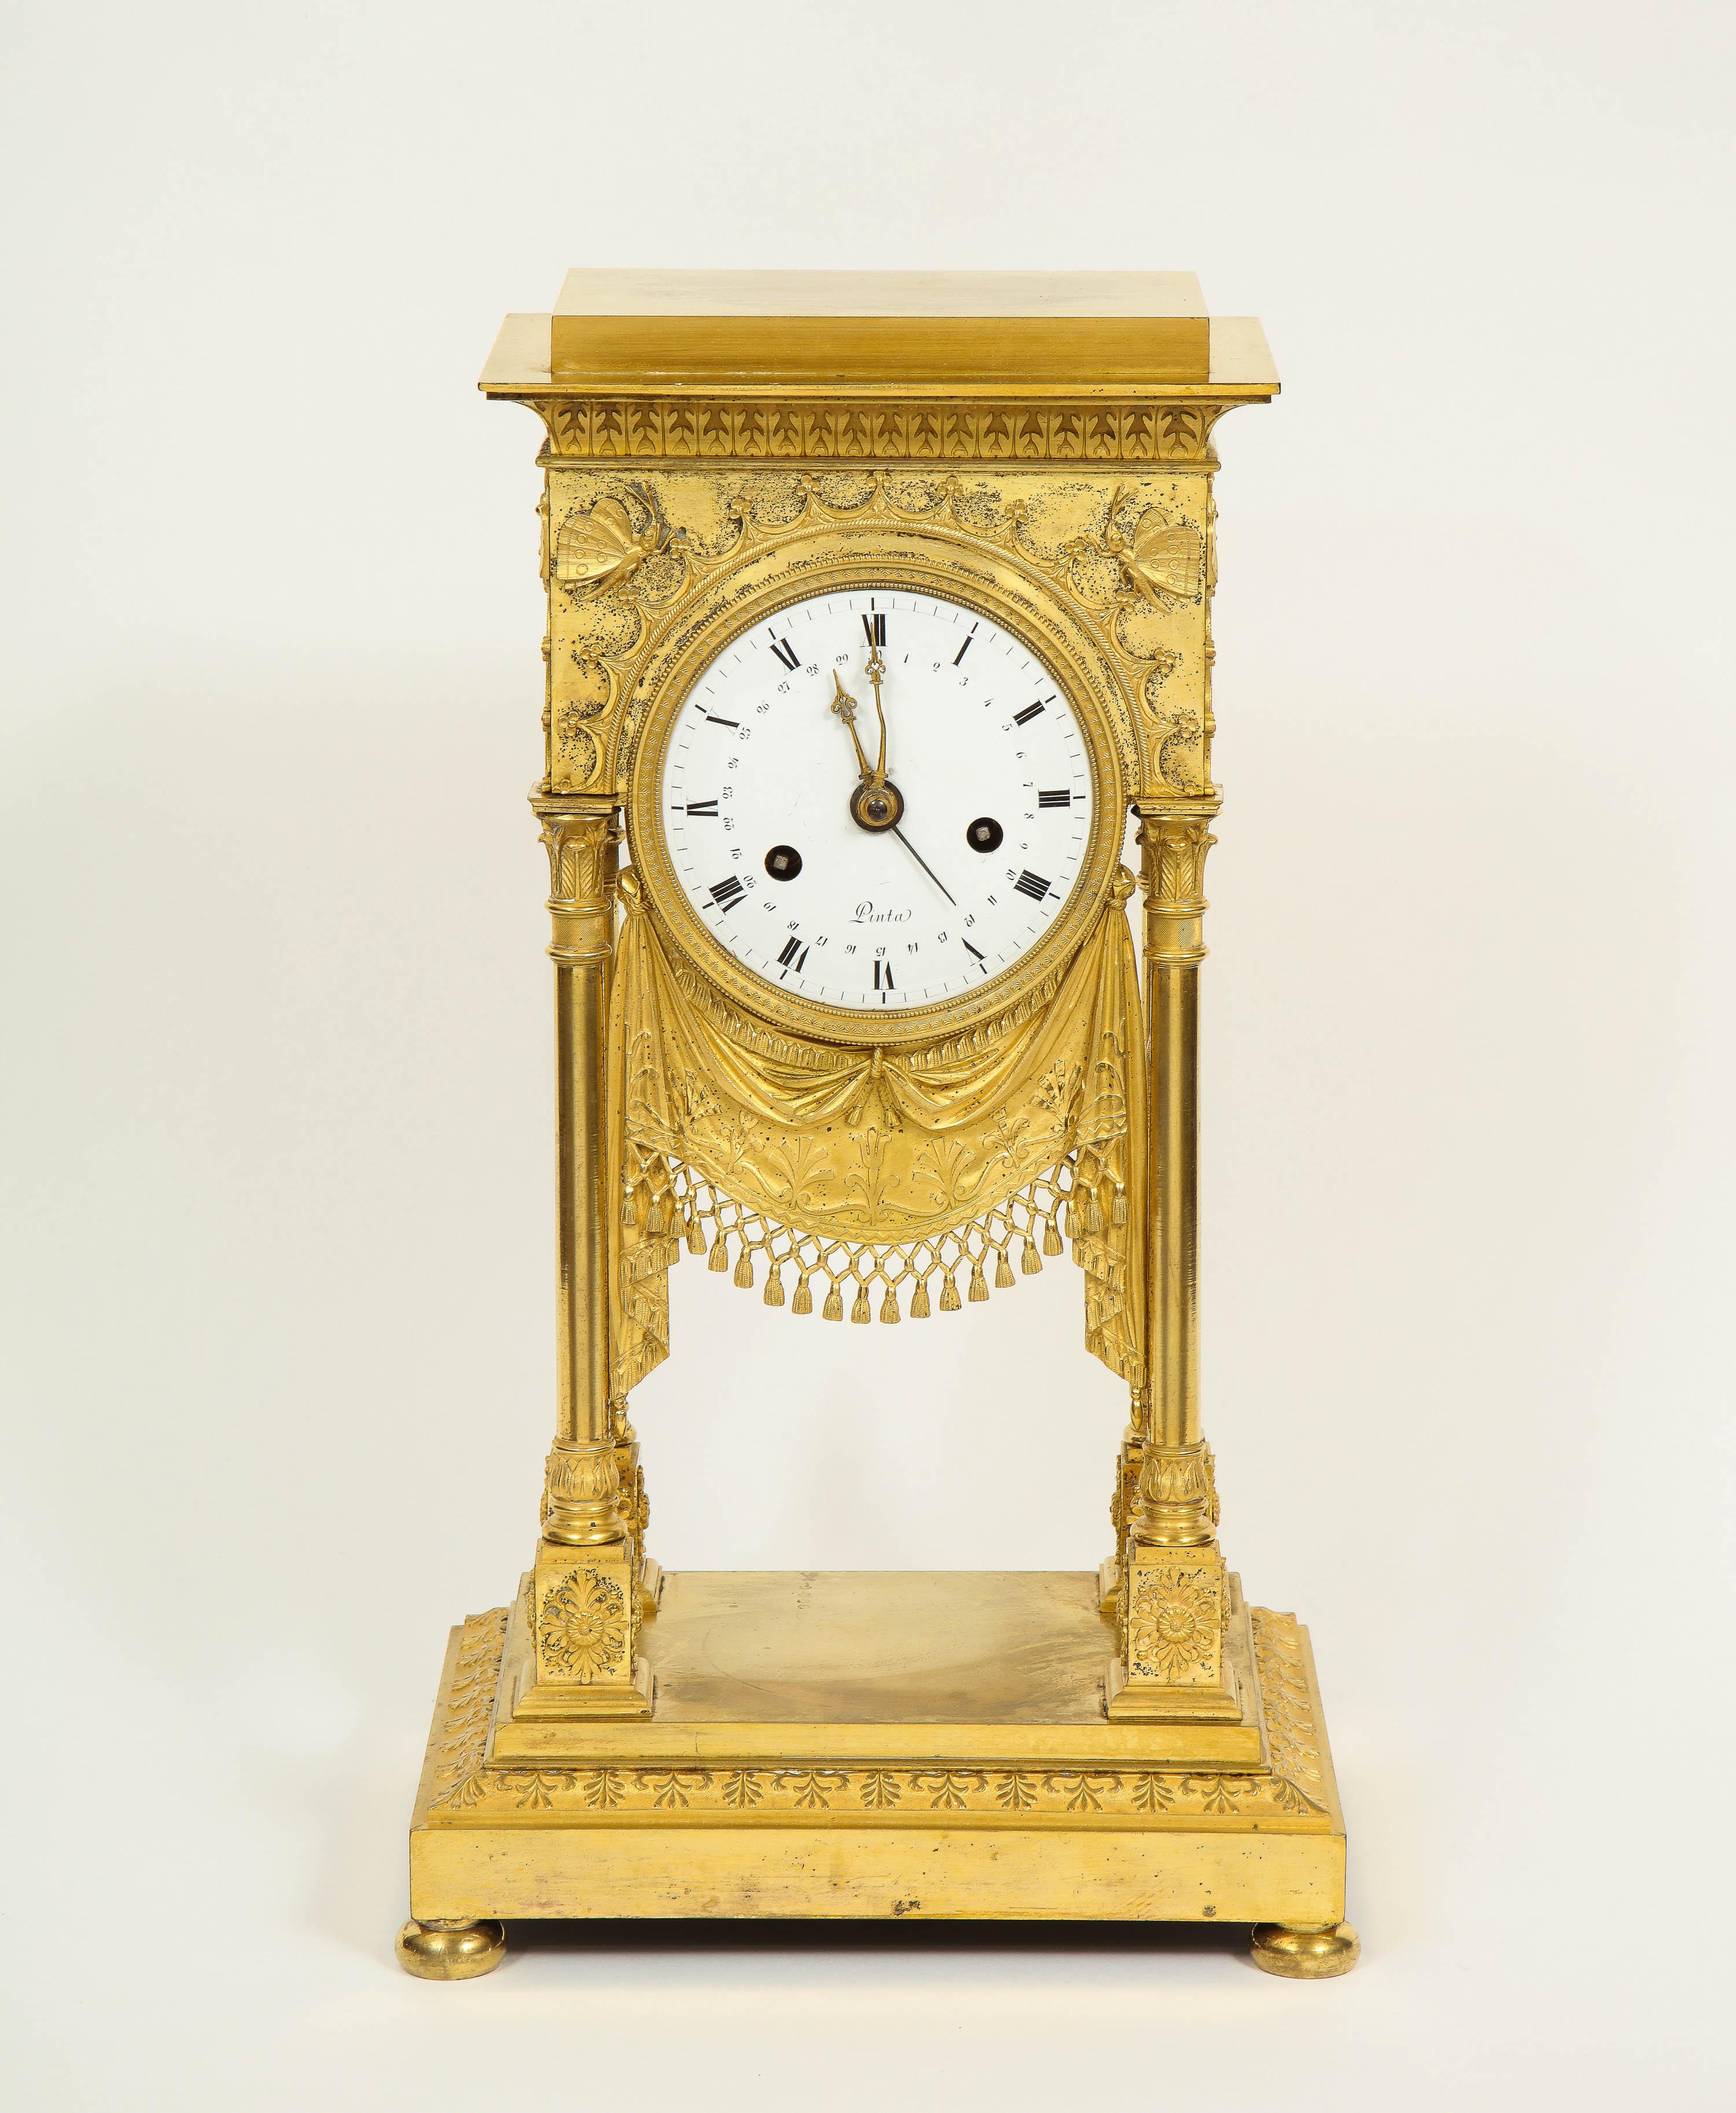 An exceptional quality French ormolu clock with dragonflies, circa 1830.

This French clock is so elegant and unique. The ormolu is mercury gilding, extremely bright and crisp.
Each top corner has a dragonfly which is very unusual and quite